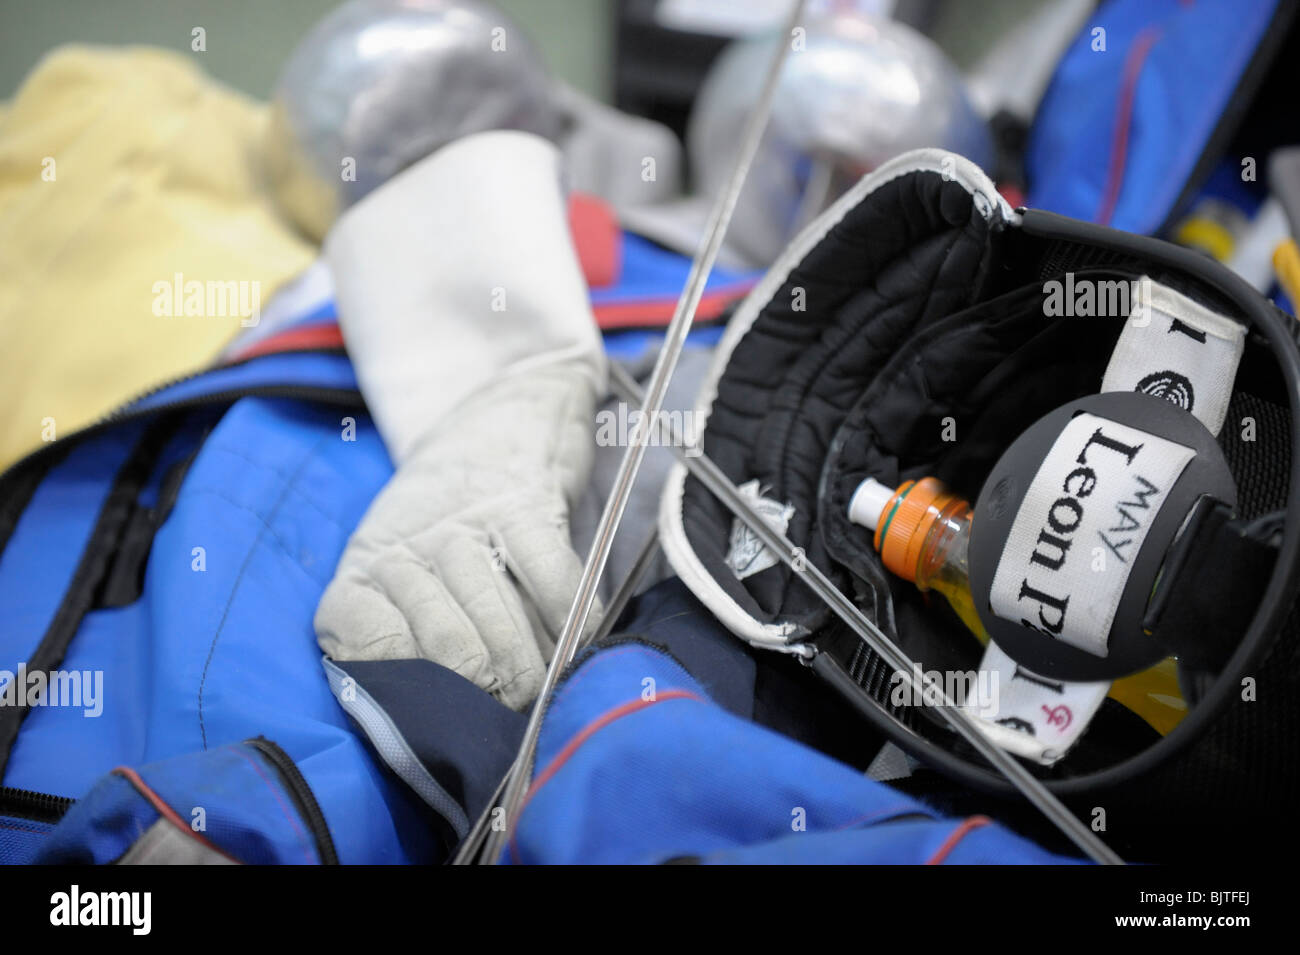 Aspiring members of the UK fencing team take part in a fencing competition, Morden, 28 November 2009. Stock Photo